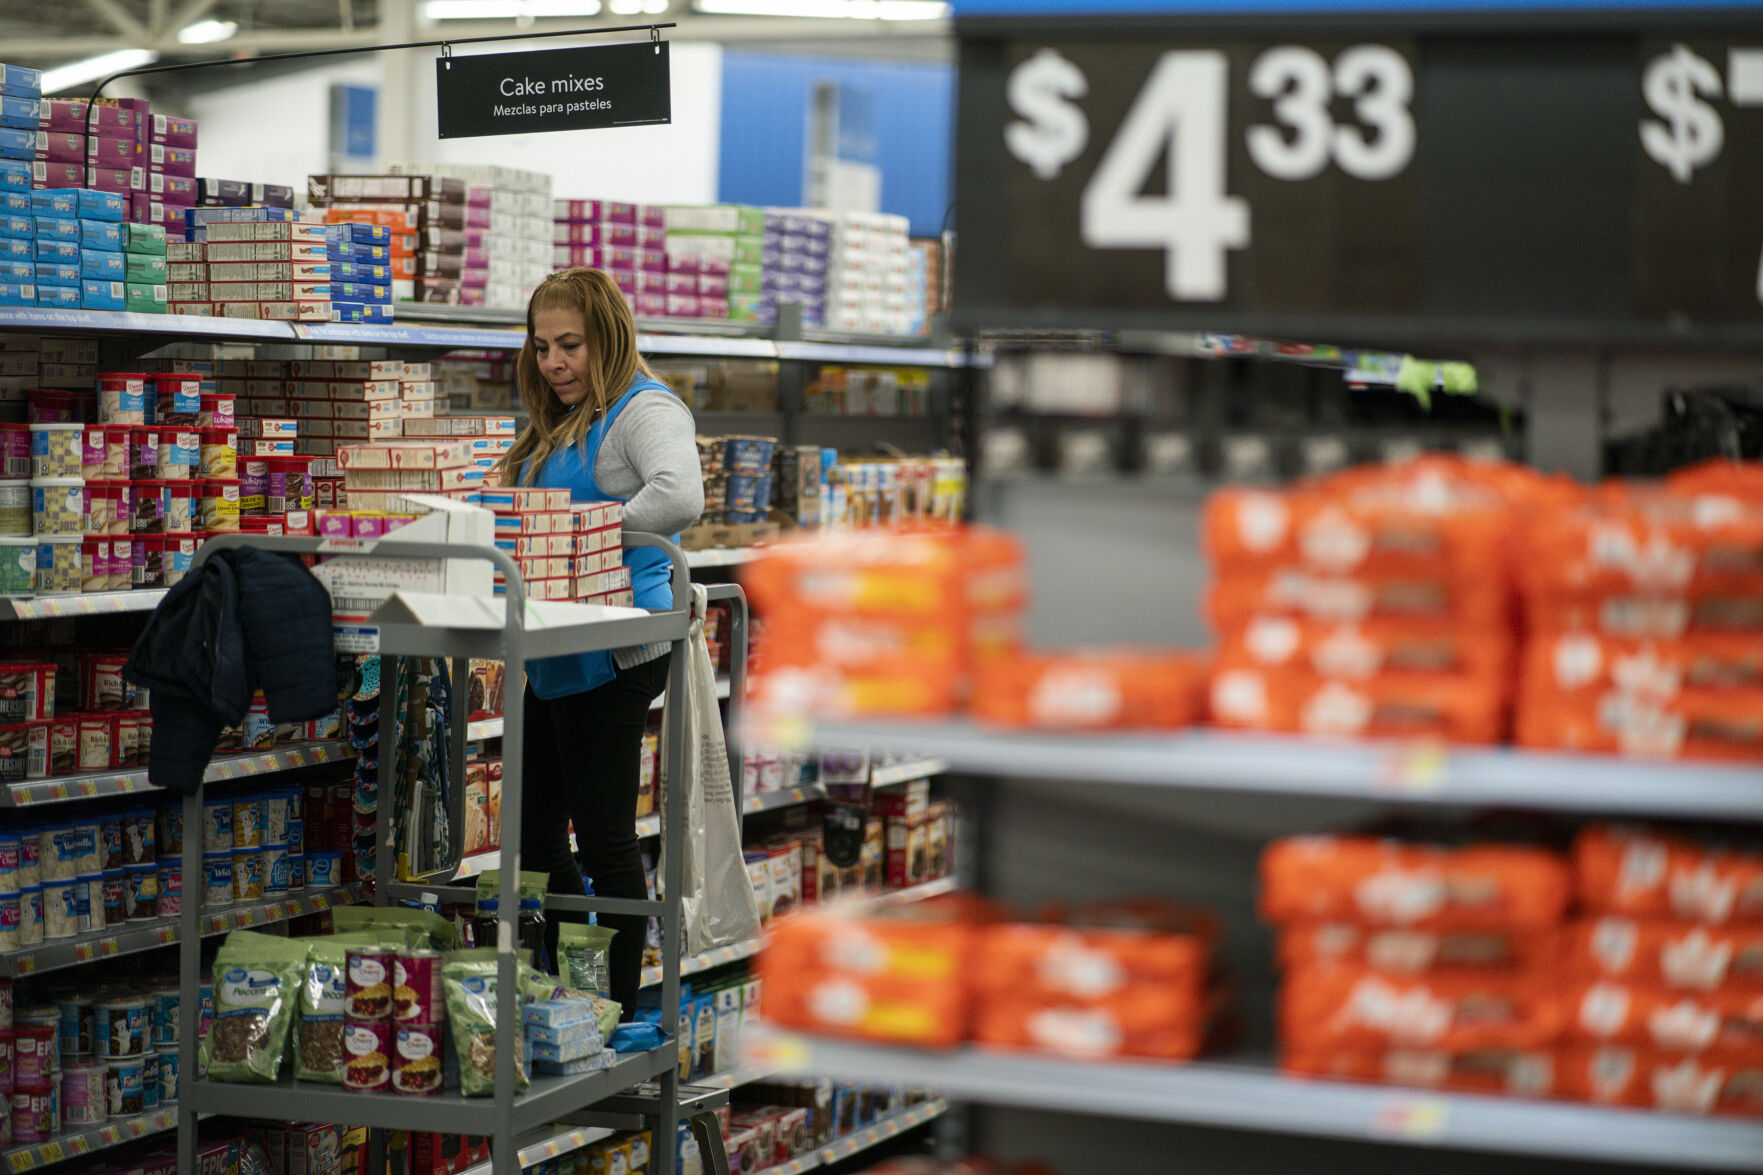 <p>A worker organizes items at a Walmart Supercenter in North Bergen, N.J., on Thursday, Feb. 9, 2023. On Tuesday, the Labor Department reports on U.S. consumer prices for February. (AP Photo/Eduardo Munoz Alvarez)</p>   PHOTO CREDIT: Eduardo Munoz Alvarez 